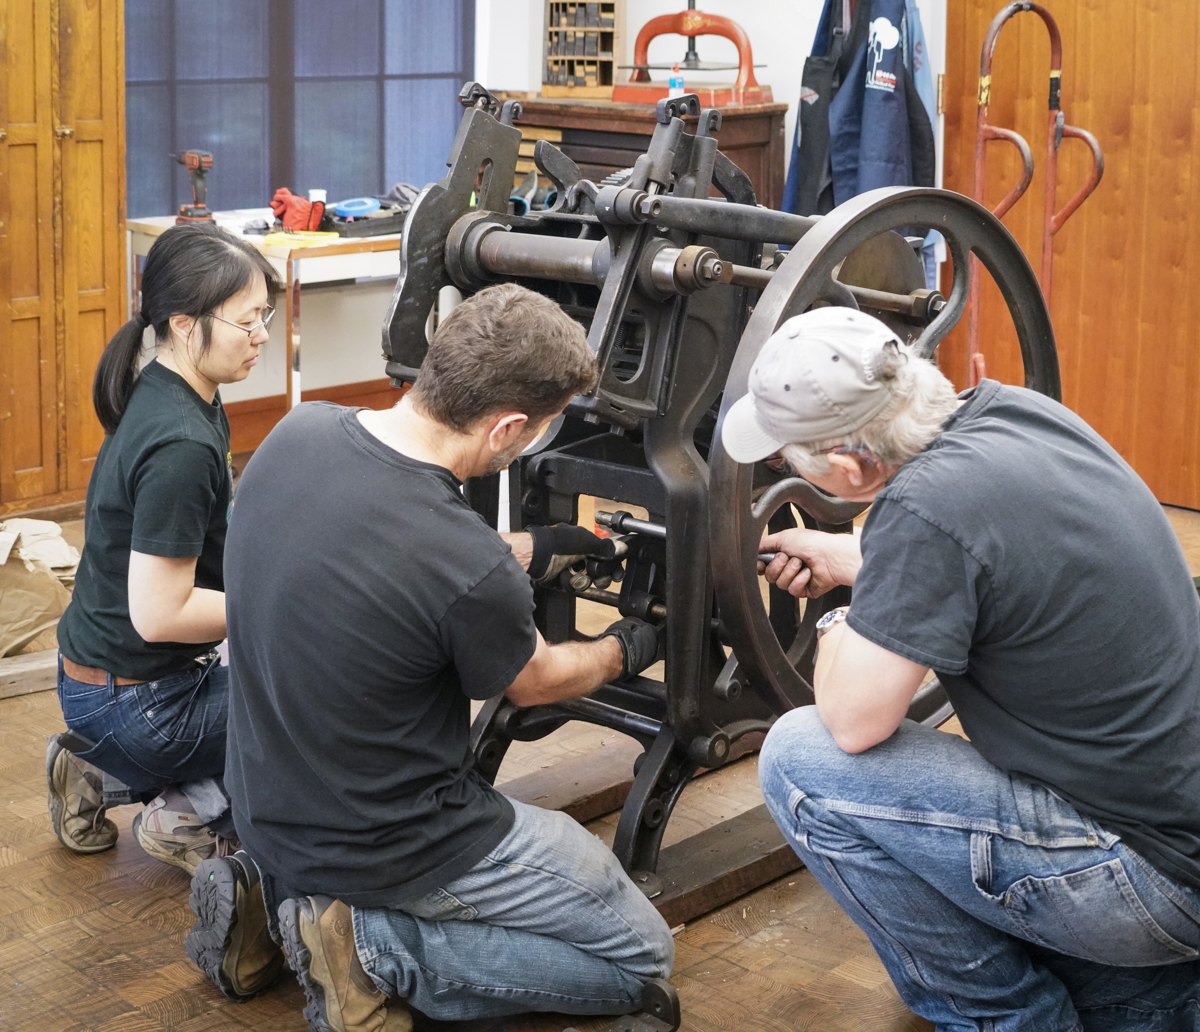 three people work on an old press together